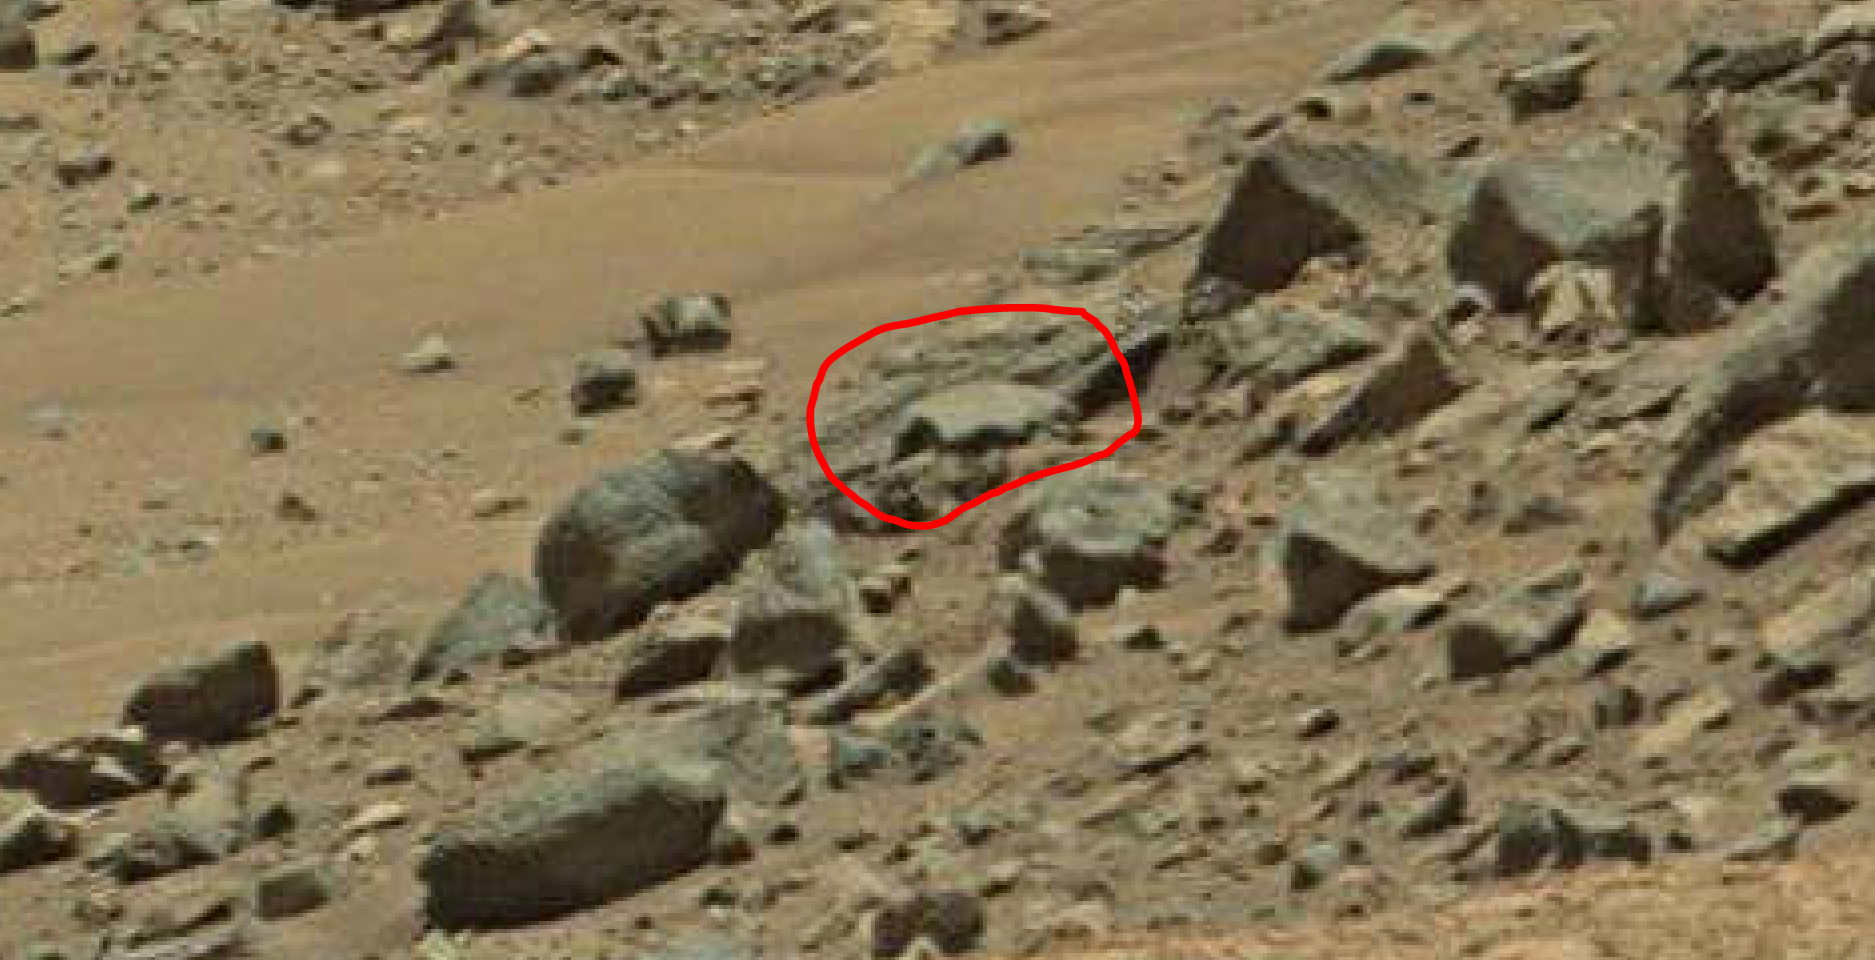 mars sol 1378 anomaly-artifacts 7 was life on mars